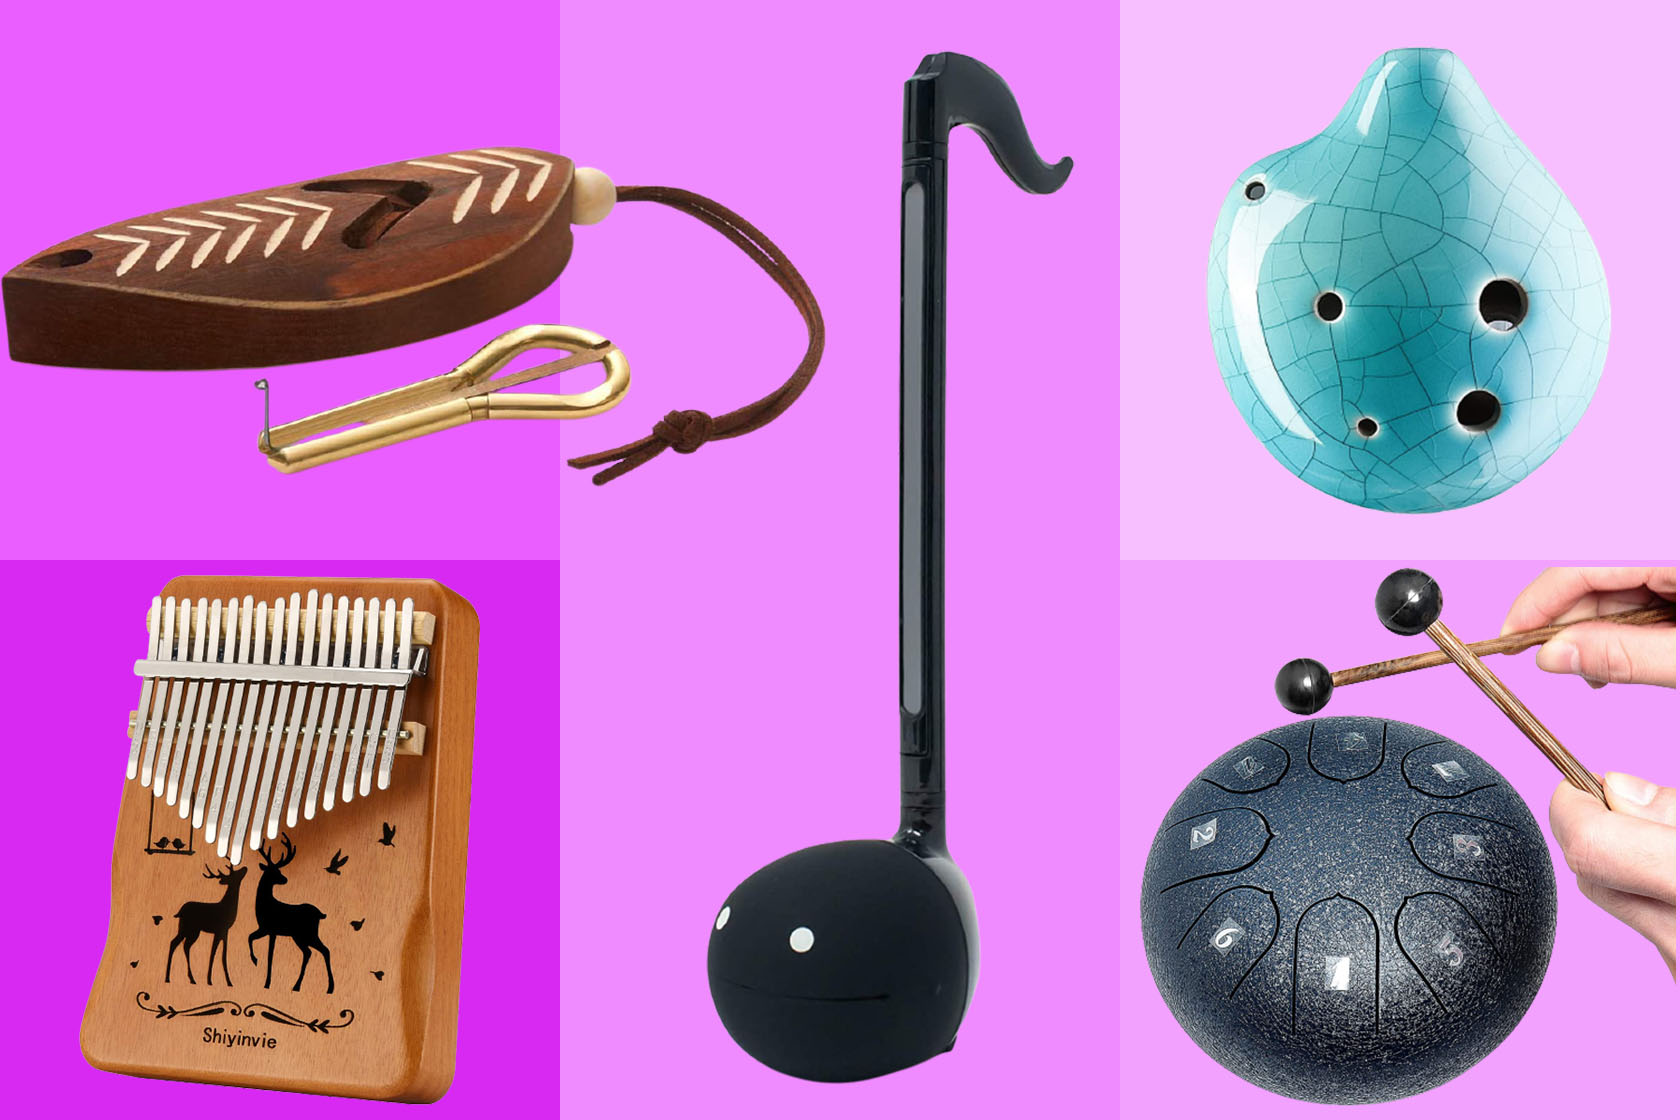 Affordable musical instruments